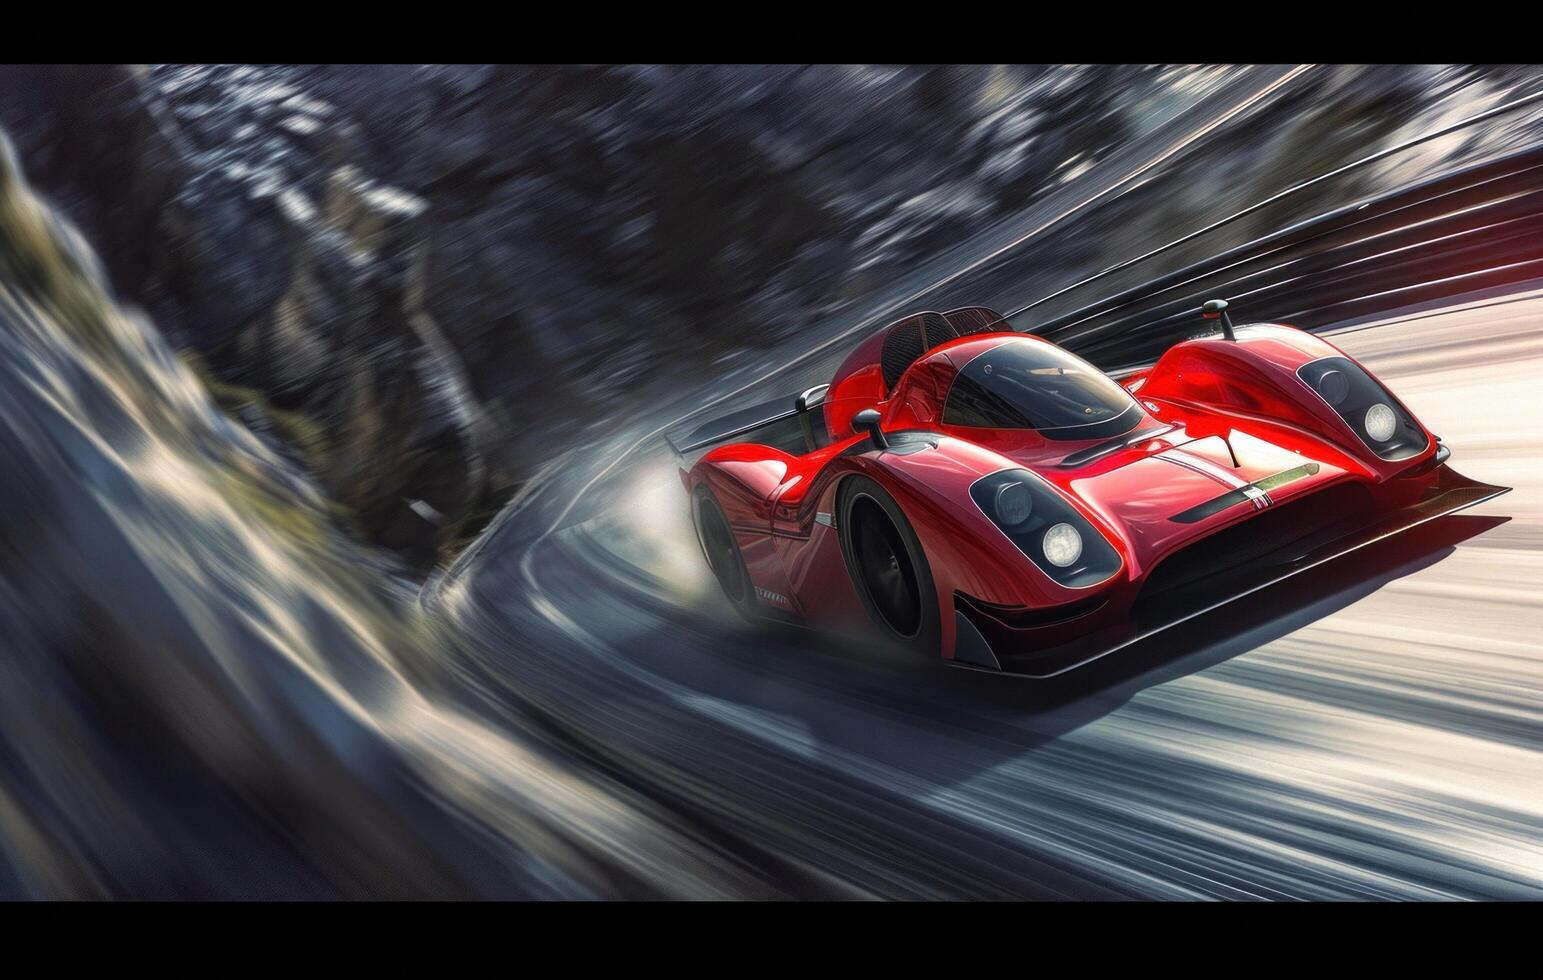 AI generated in a ealier art illustration a red racing car moves at high speed in motion photo